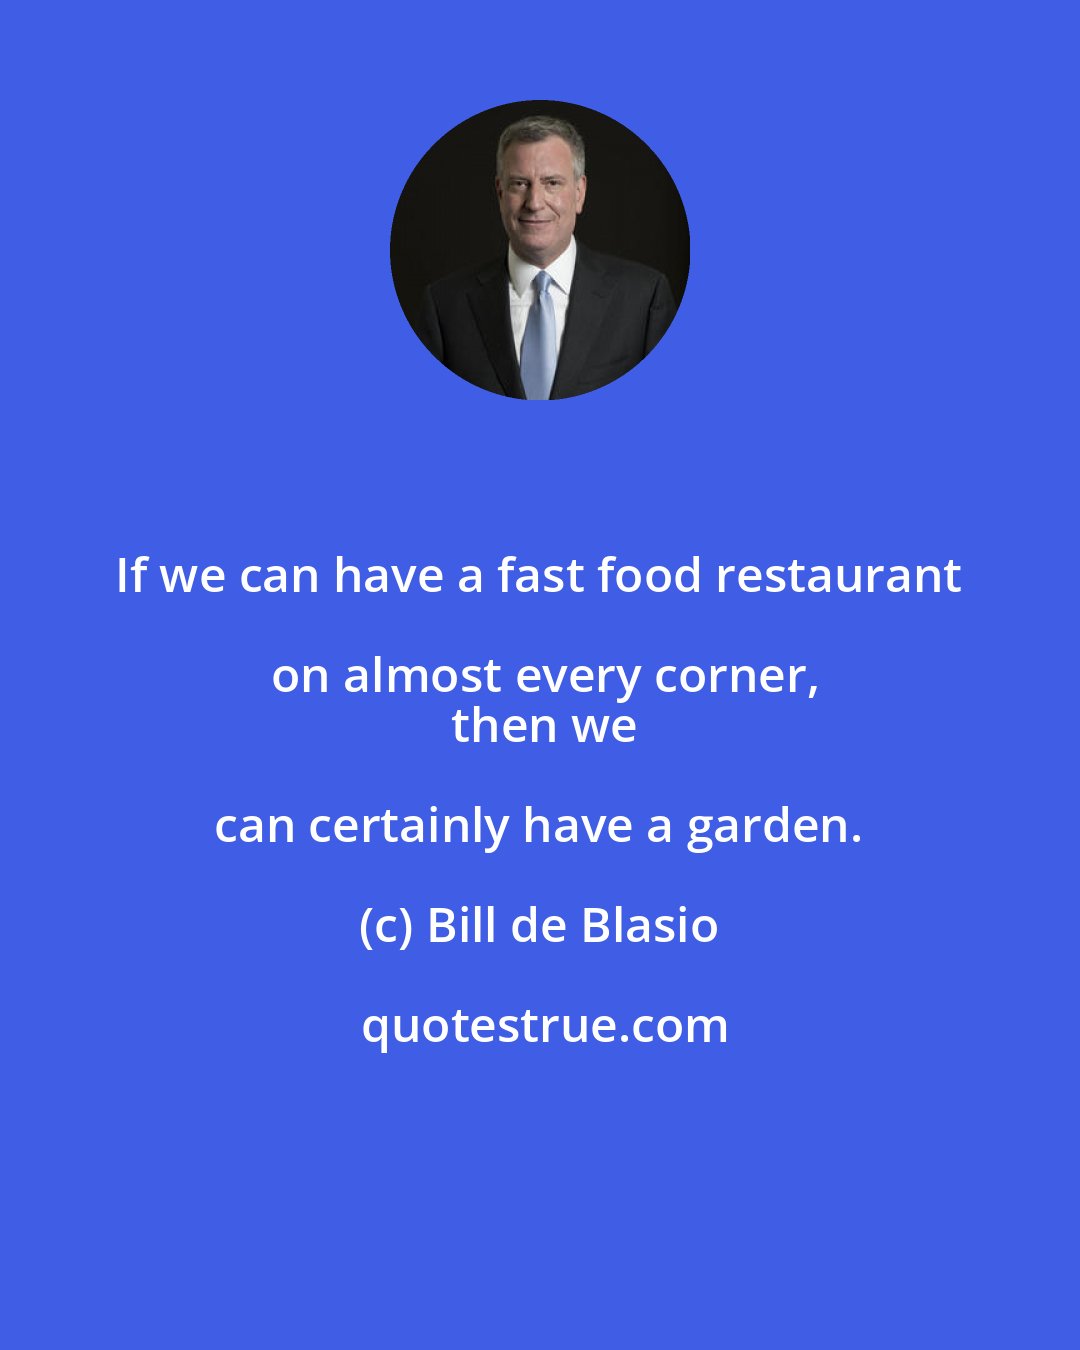 Bill de Blasio: If we can have a fast food restaurant on almost every corner,
  then we can certainly have a garden.